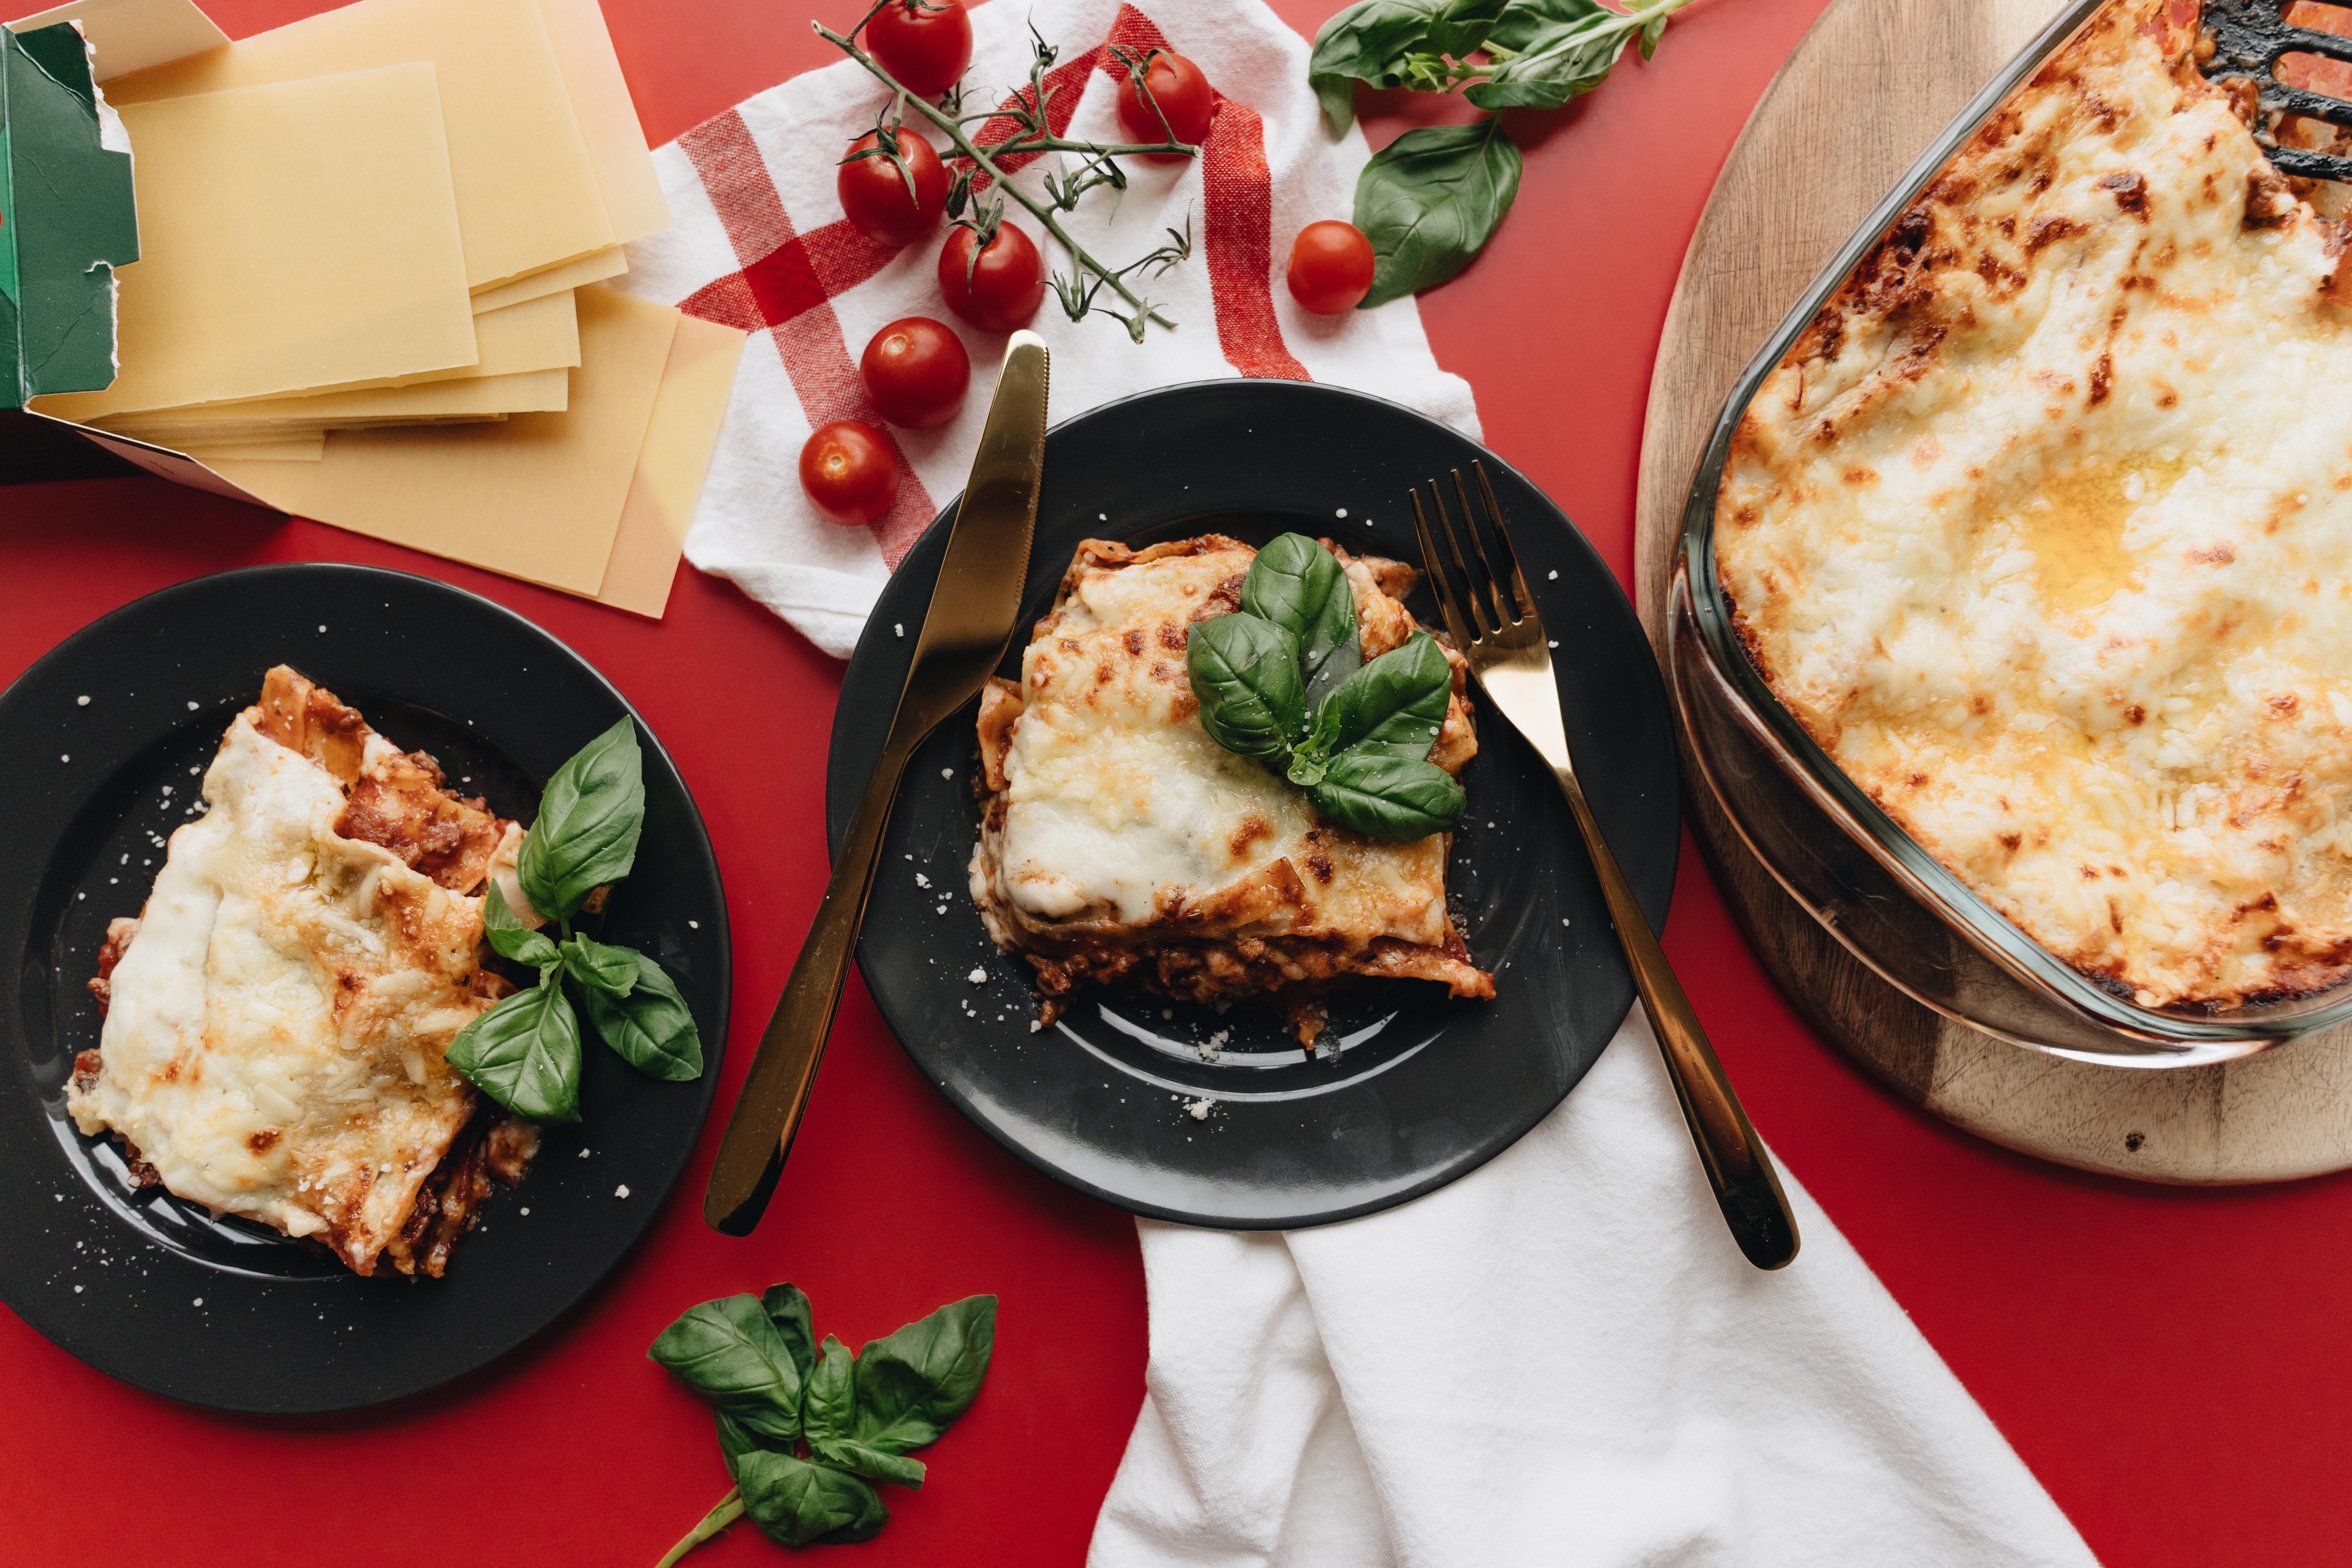 How long can lasagna sit out after baking? 